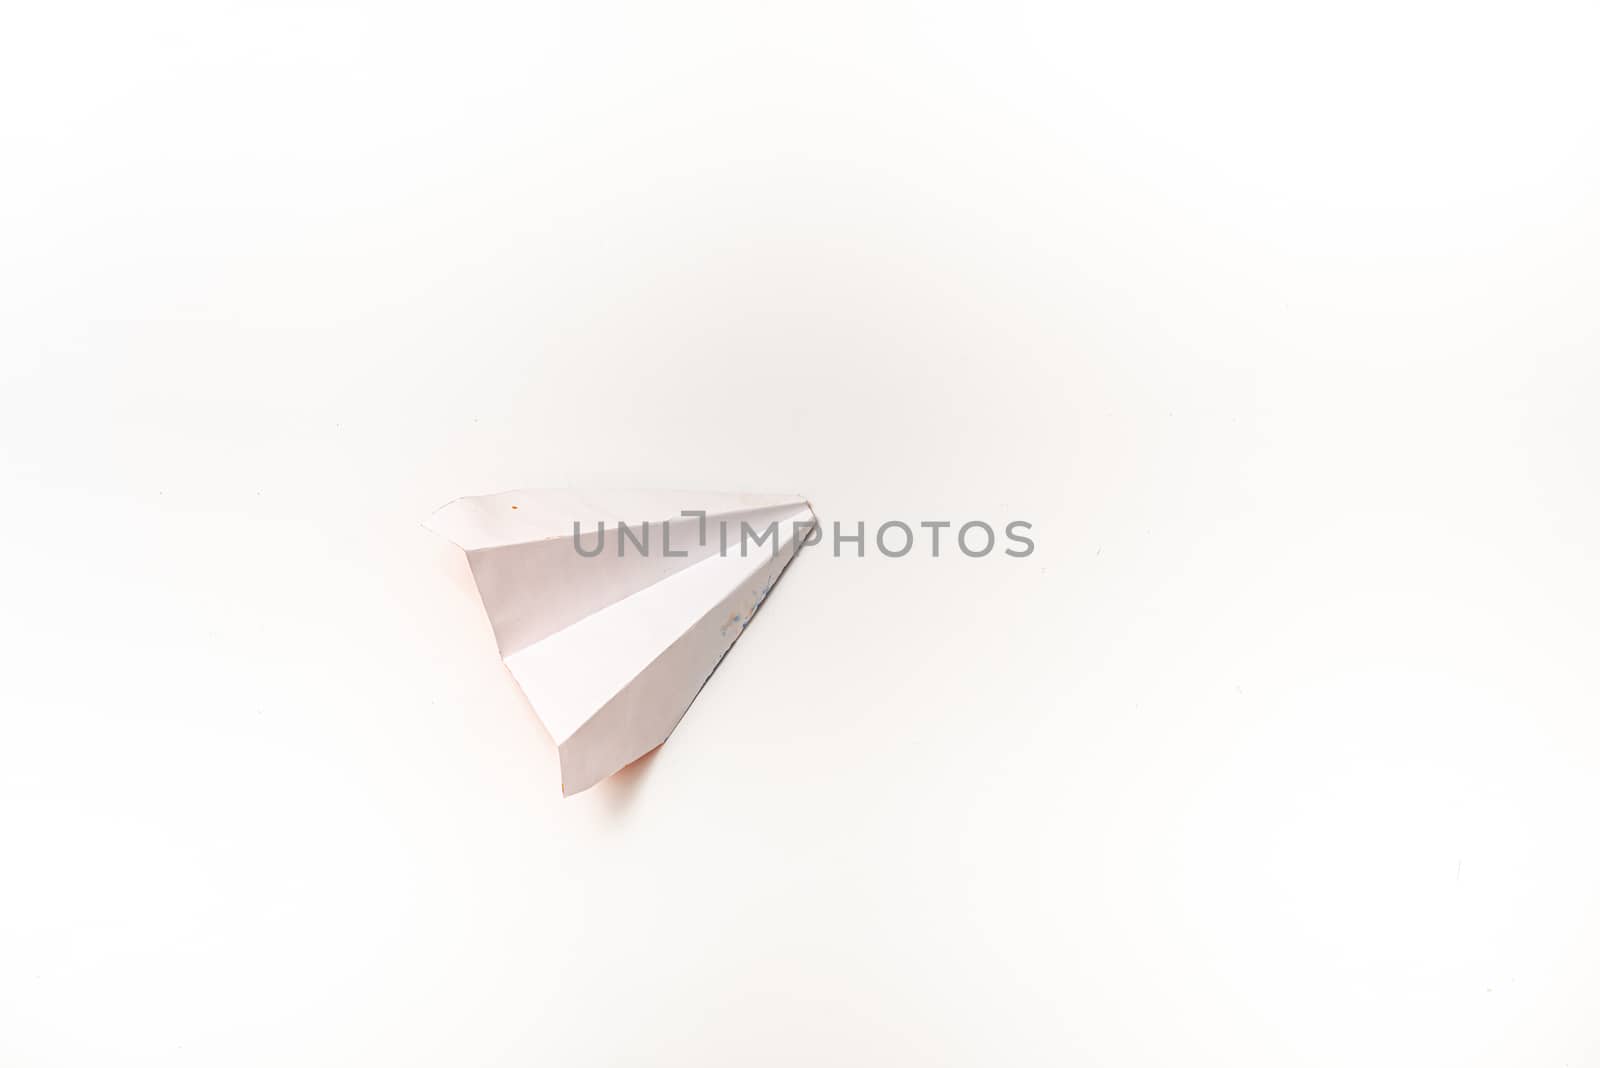 White paper plane on a white background with copy space by marynkin